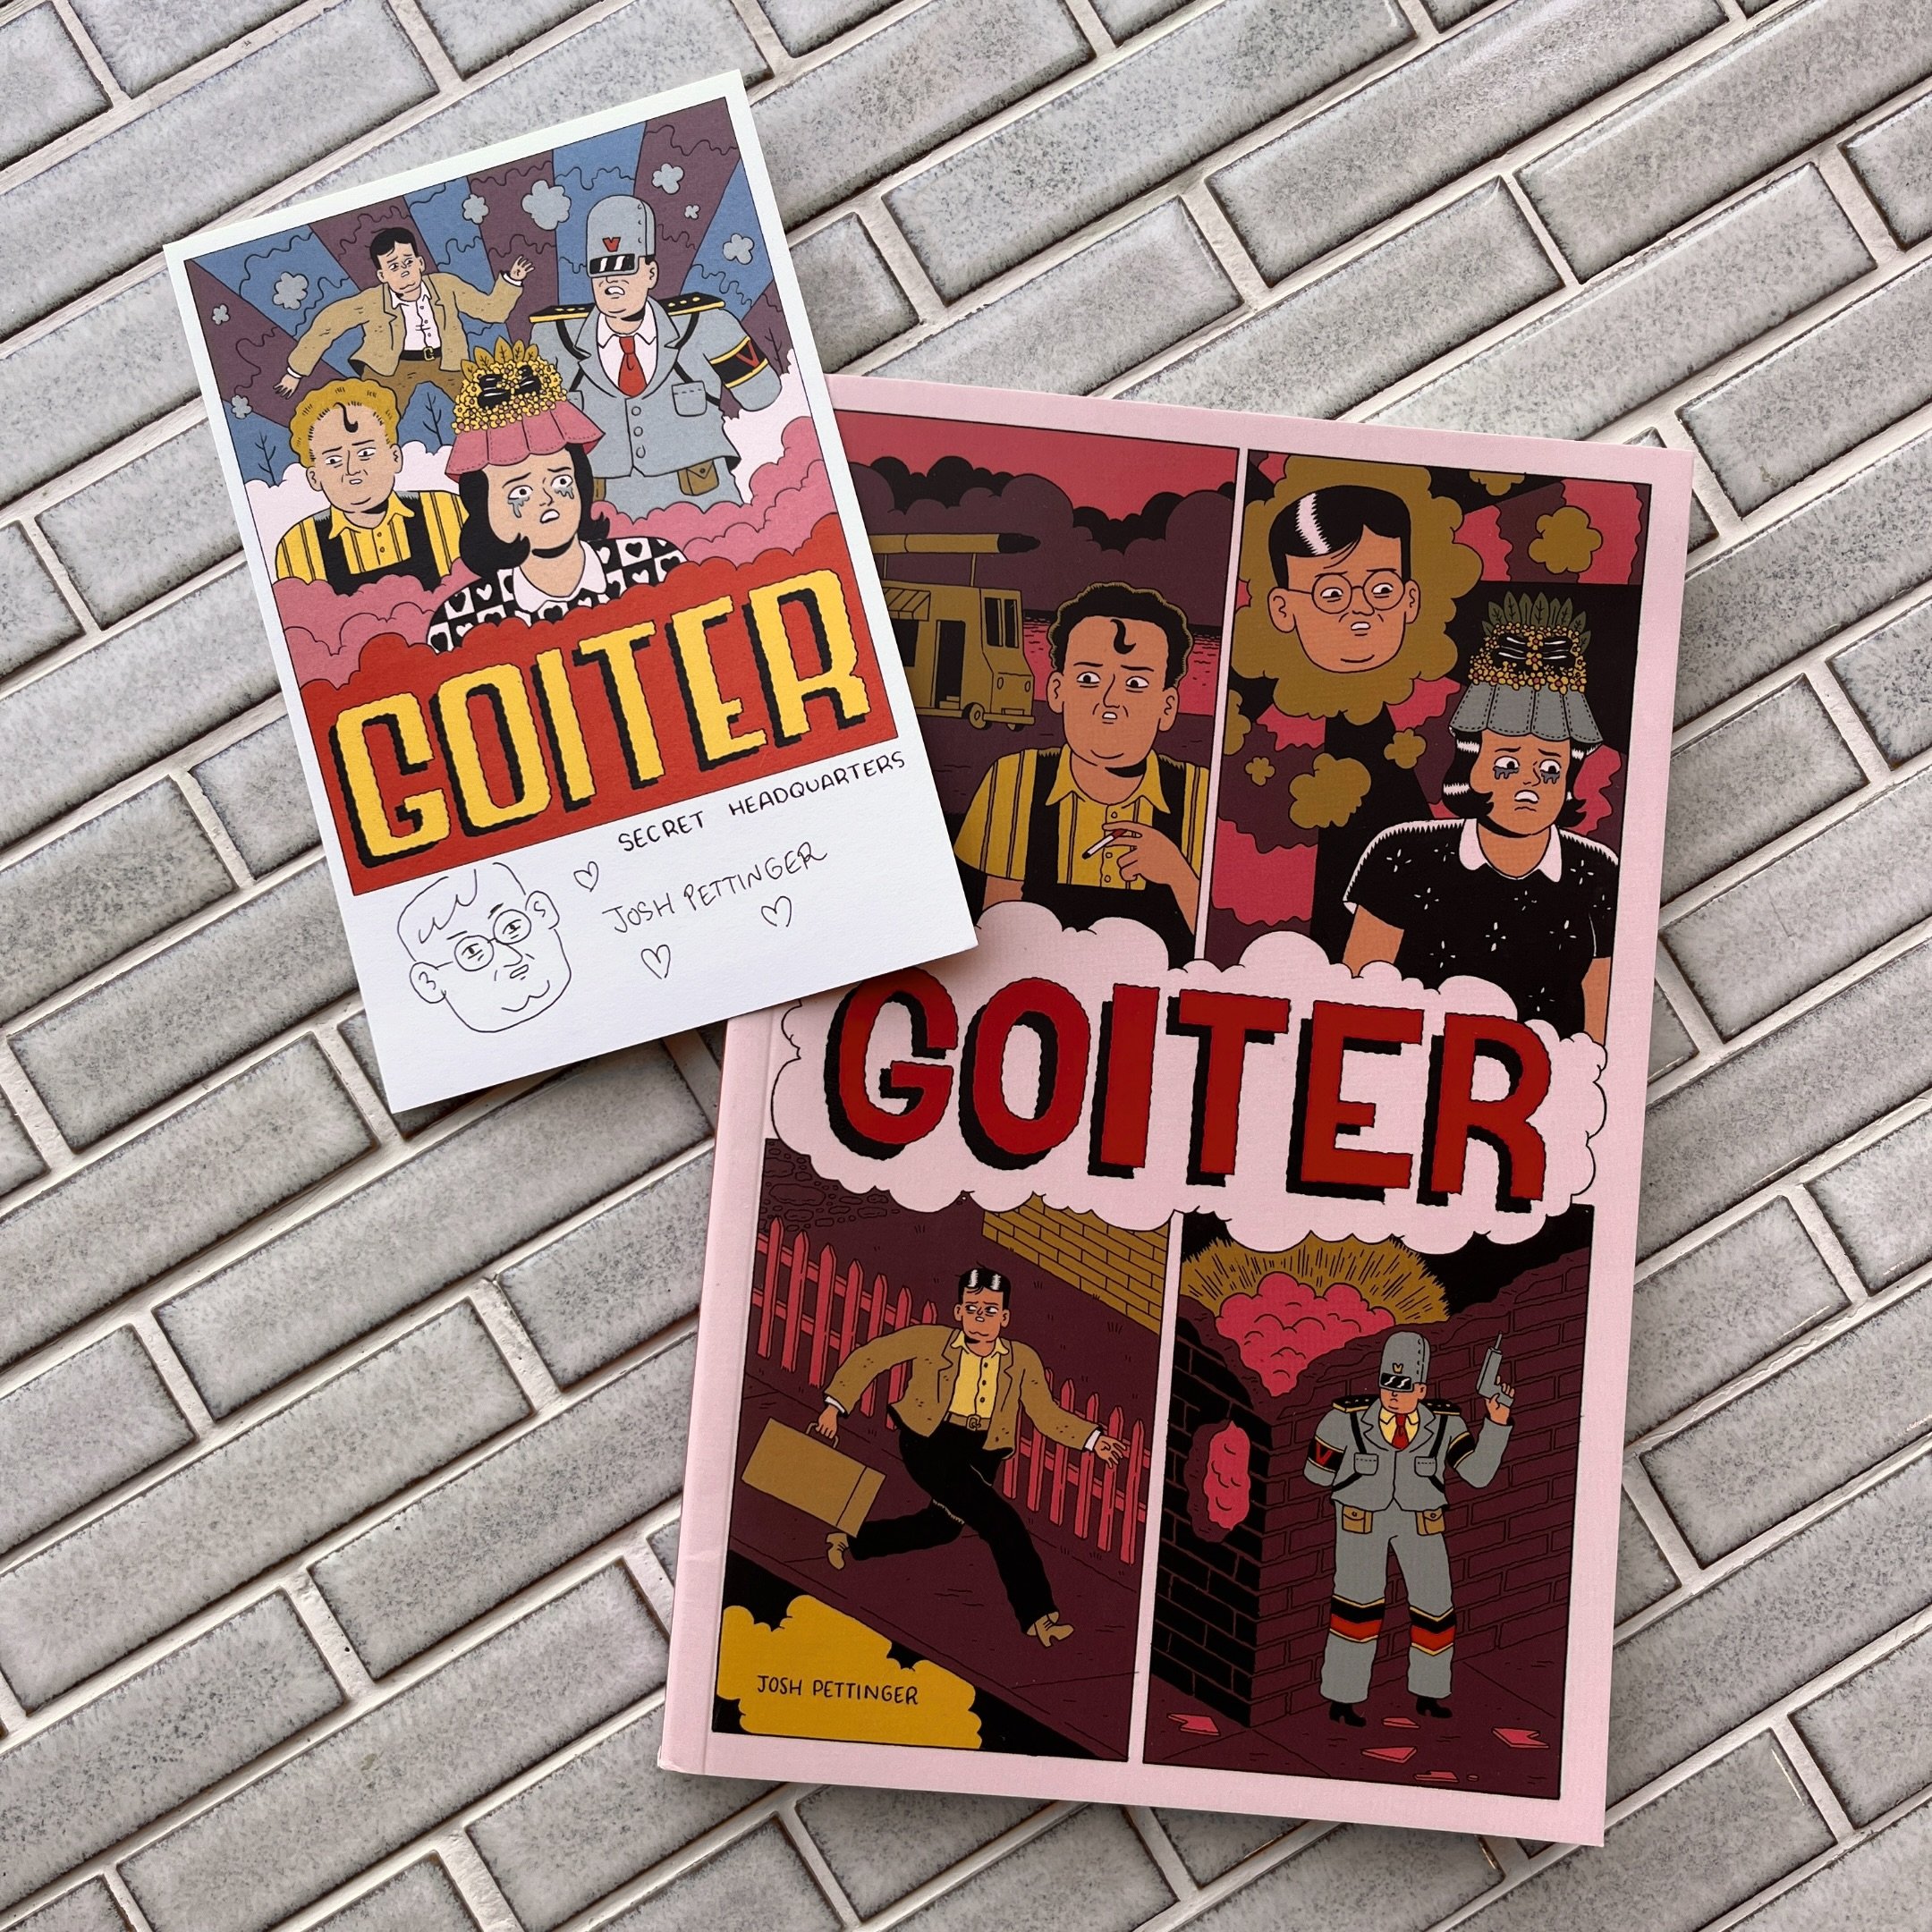 Holy hell, the wait is over... Josh Pettinger&rsquo;s Goiter series has finally been collected.

WE HAVE SIGNED EXCLUSIVE BOOKPLATES BECAUSE WE ARE SO JAZZED!

Freakin&rsquo; Angoul&ecirc;me Official Selection 2024, y&rsquo;all.

&ldquo;GOITER is the